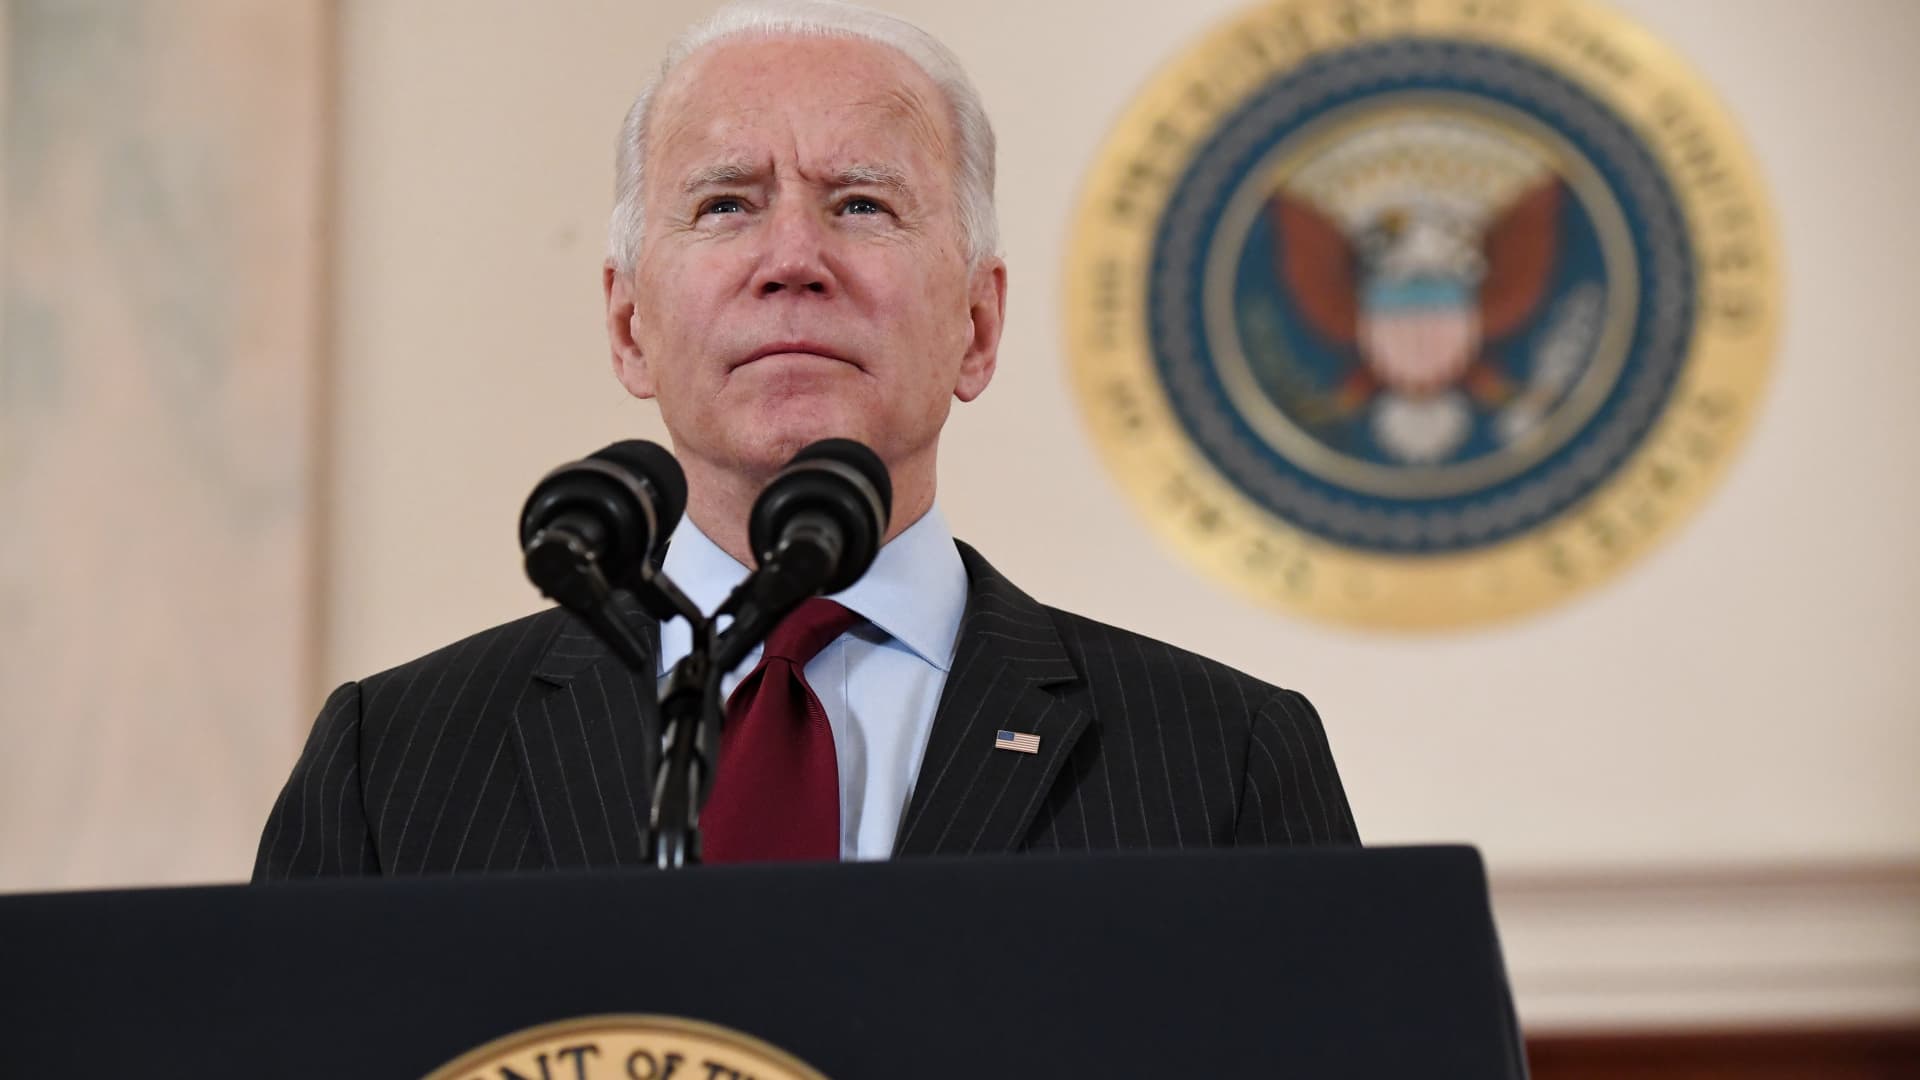 US President Joe Biden speaks about lives lost to Covid after death toll passed 500,000, in the Cross Hall of the White House in Washington, DC, February 22, 2021.